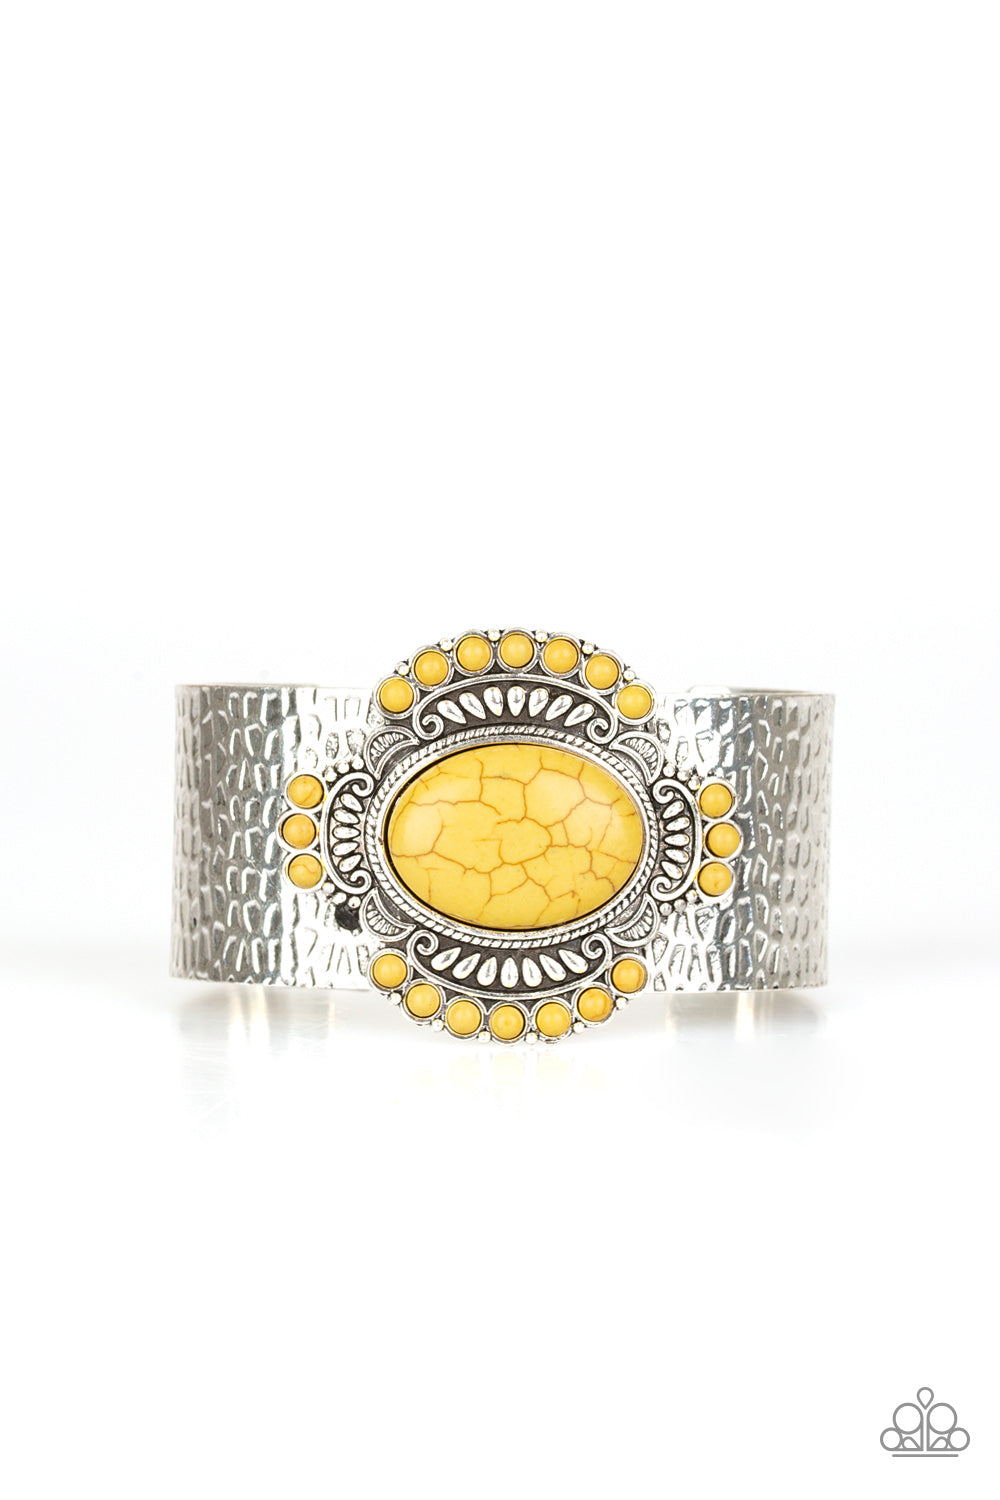 CANYON CRAFTED - YELLOW BRACELET